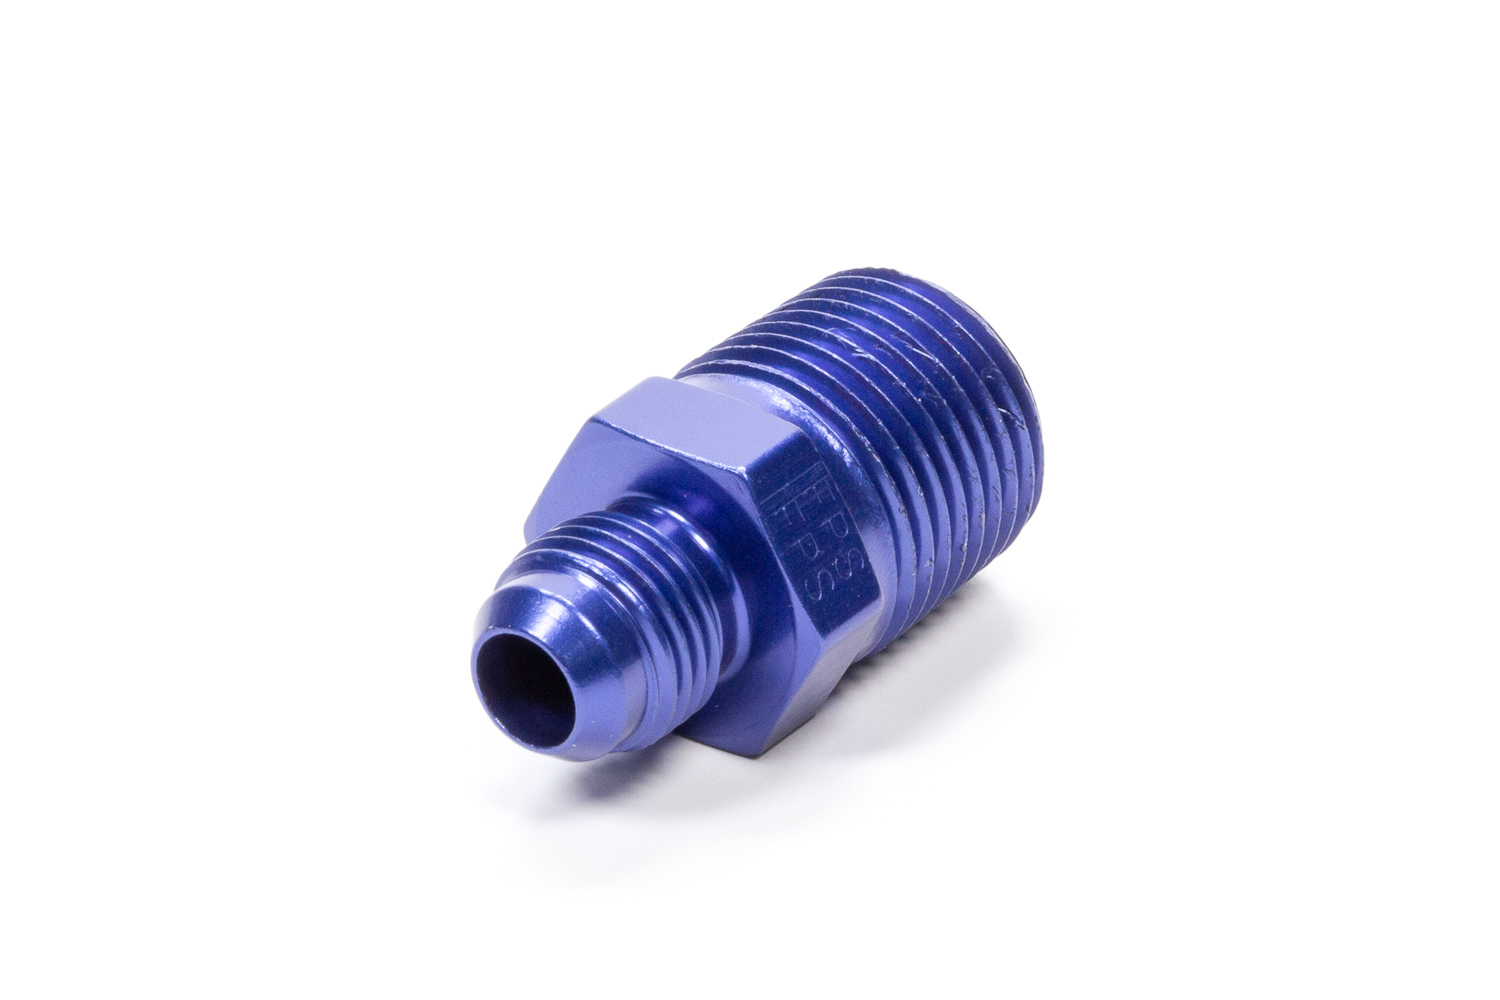 Fragola 481668 Fitting, Adapter, Straight, 6 AN Male to 1/2 in NPT Male, Aluminum, Blue Anodized, Each